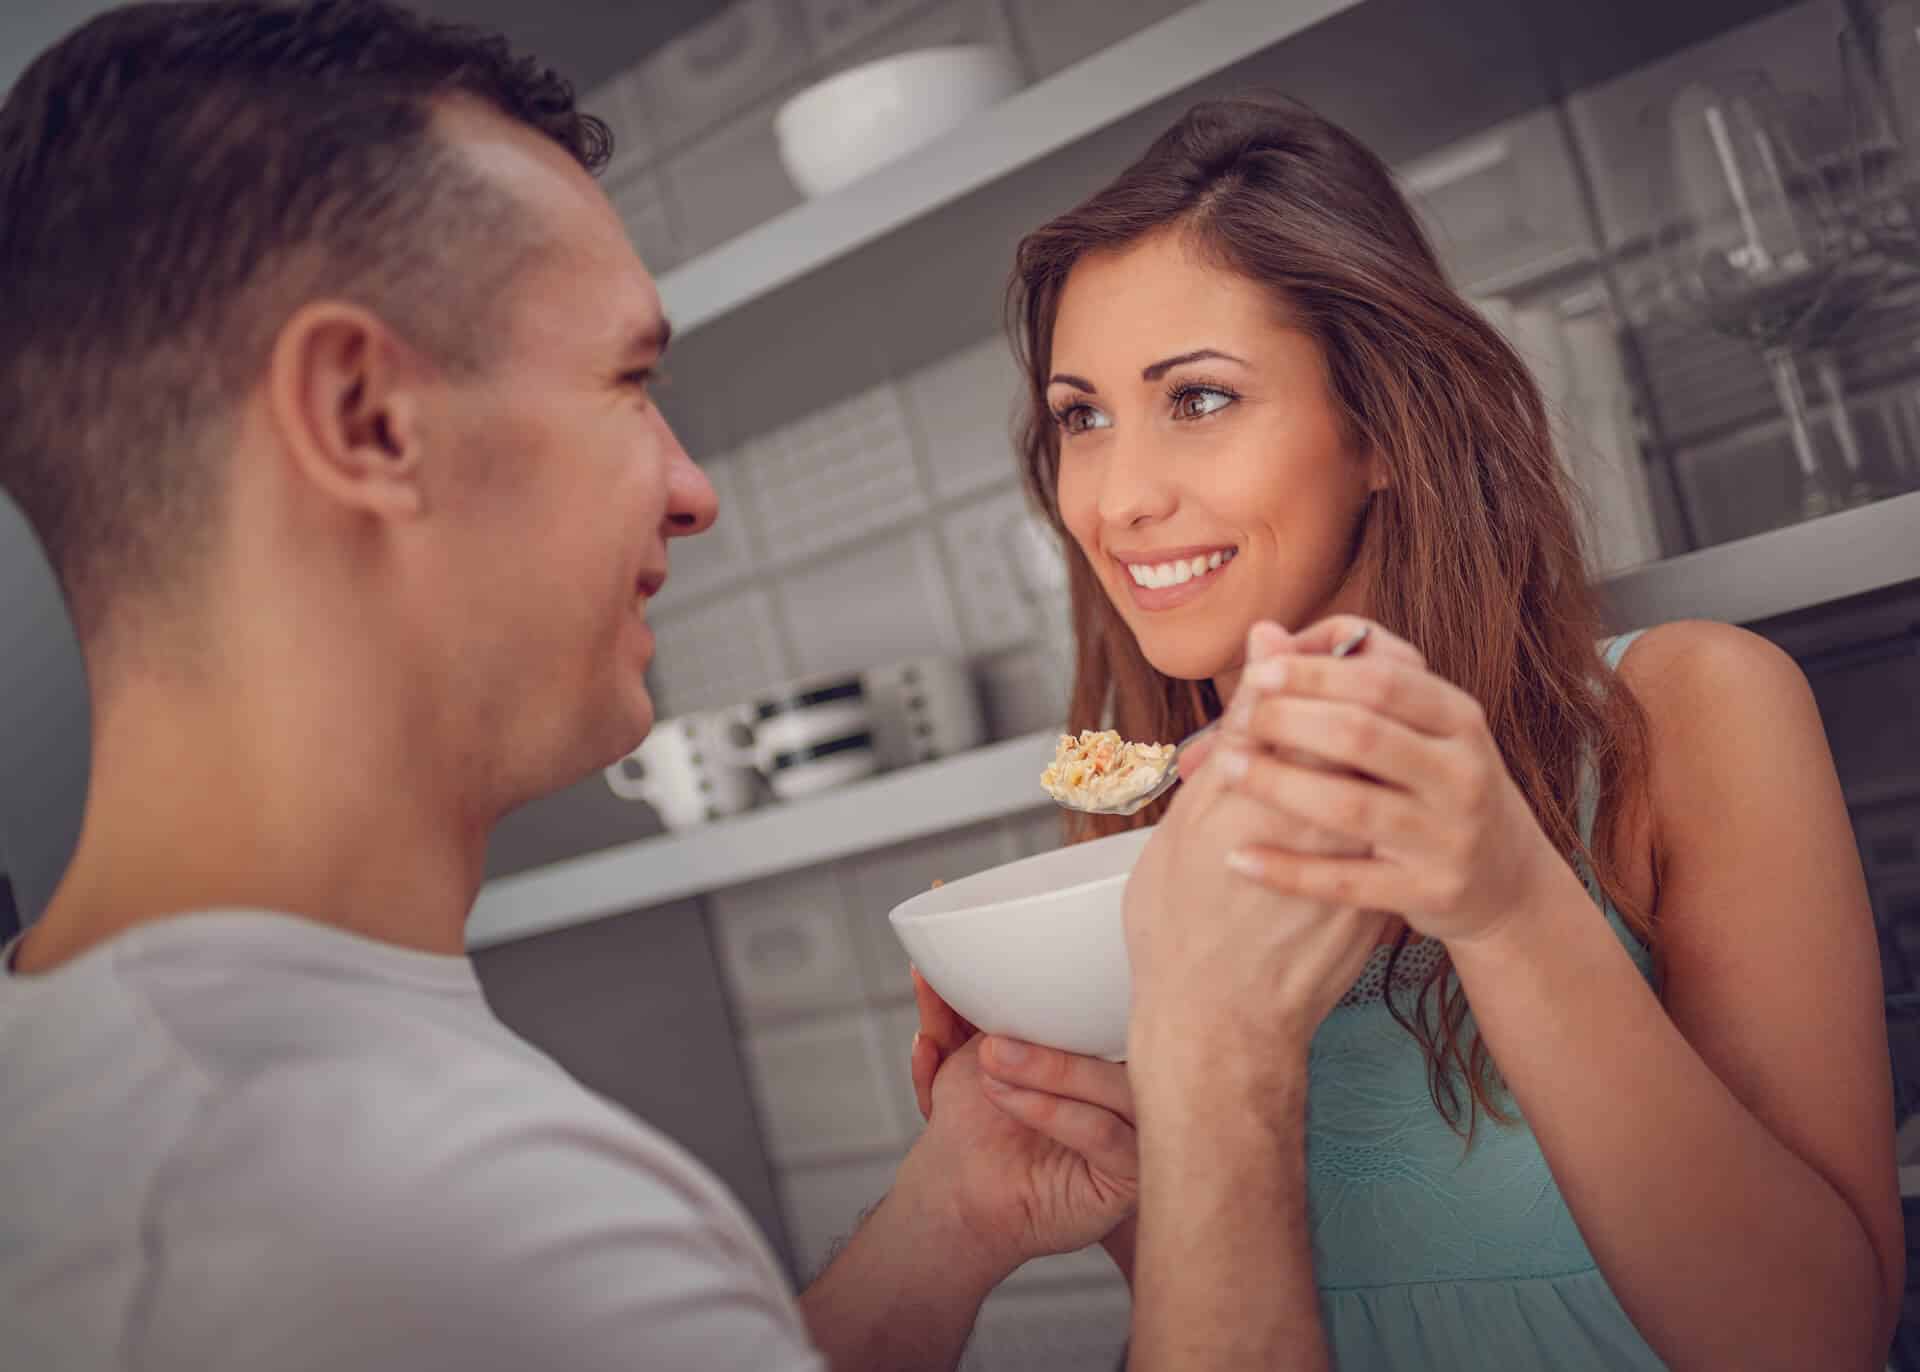 guy sharing his cereal bowl with girlfriend